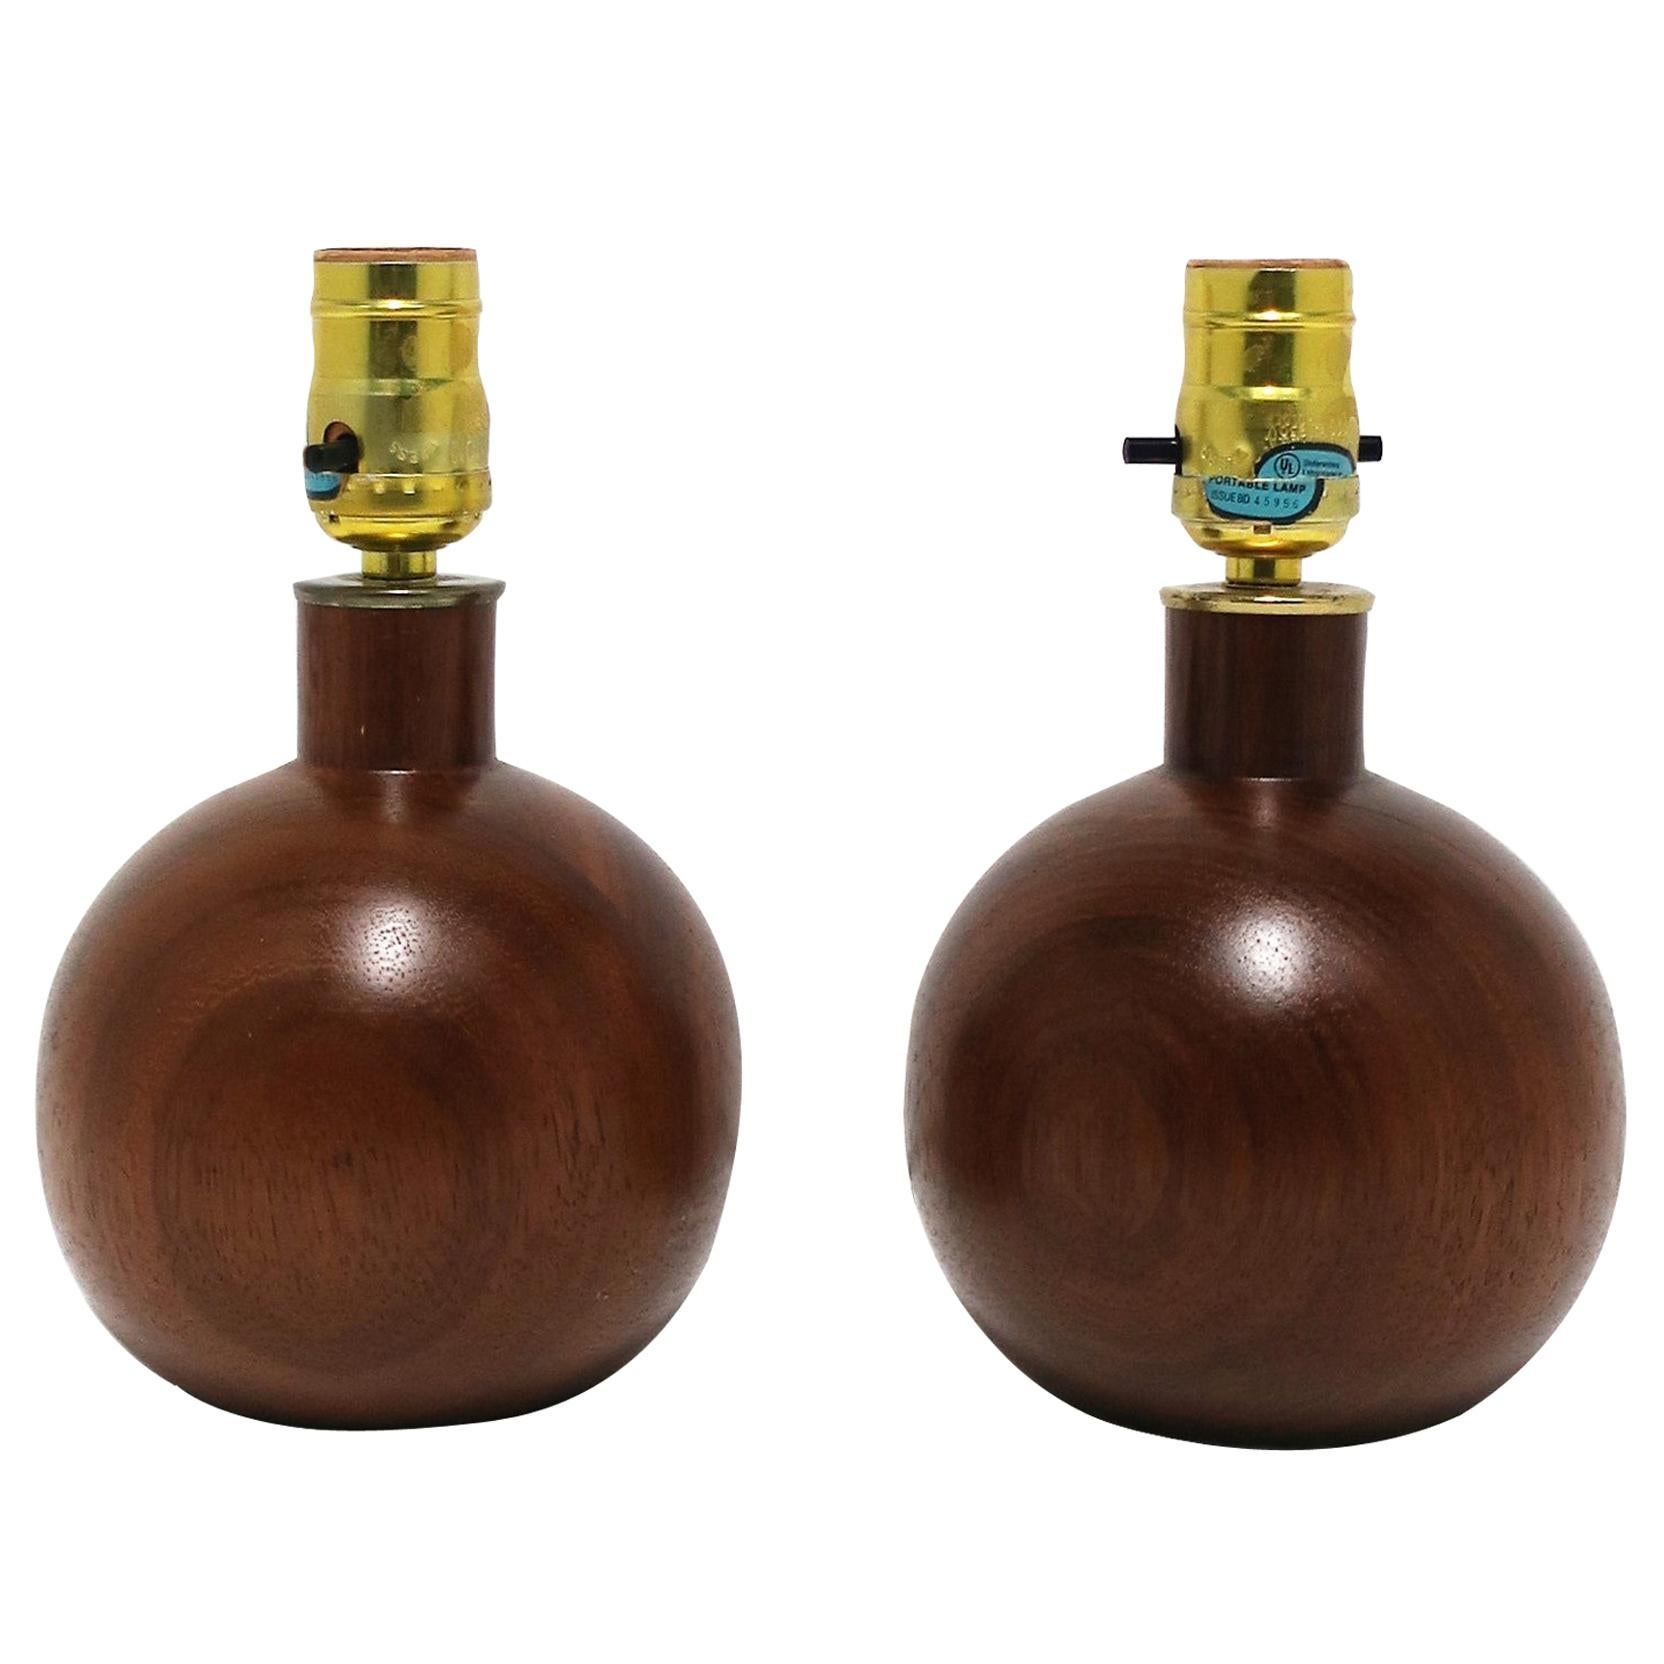 Modern Wood and Brass Round Ball Sphere Desk or Table Lamps